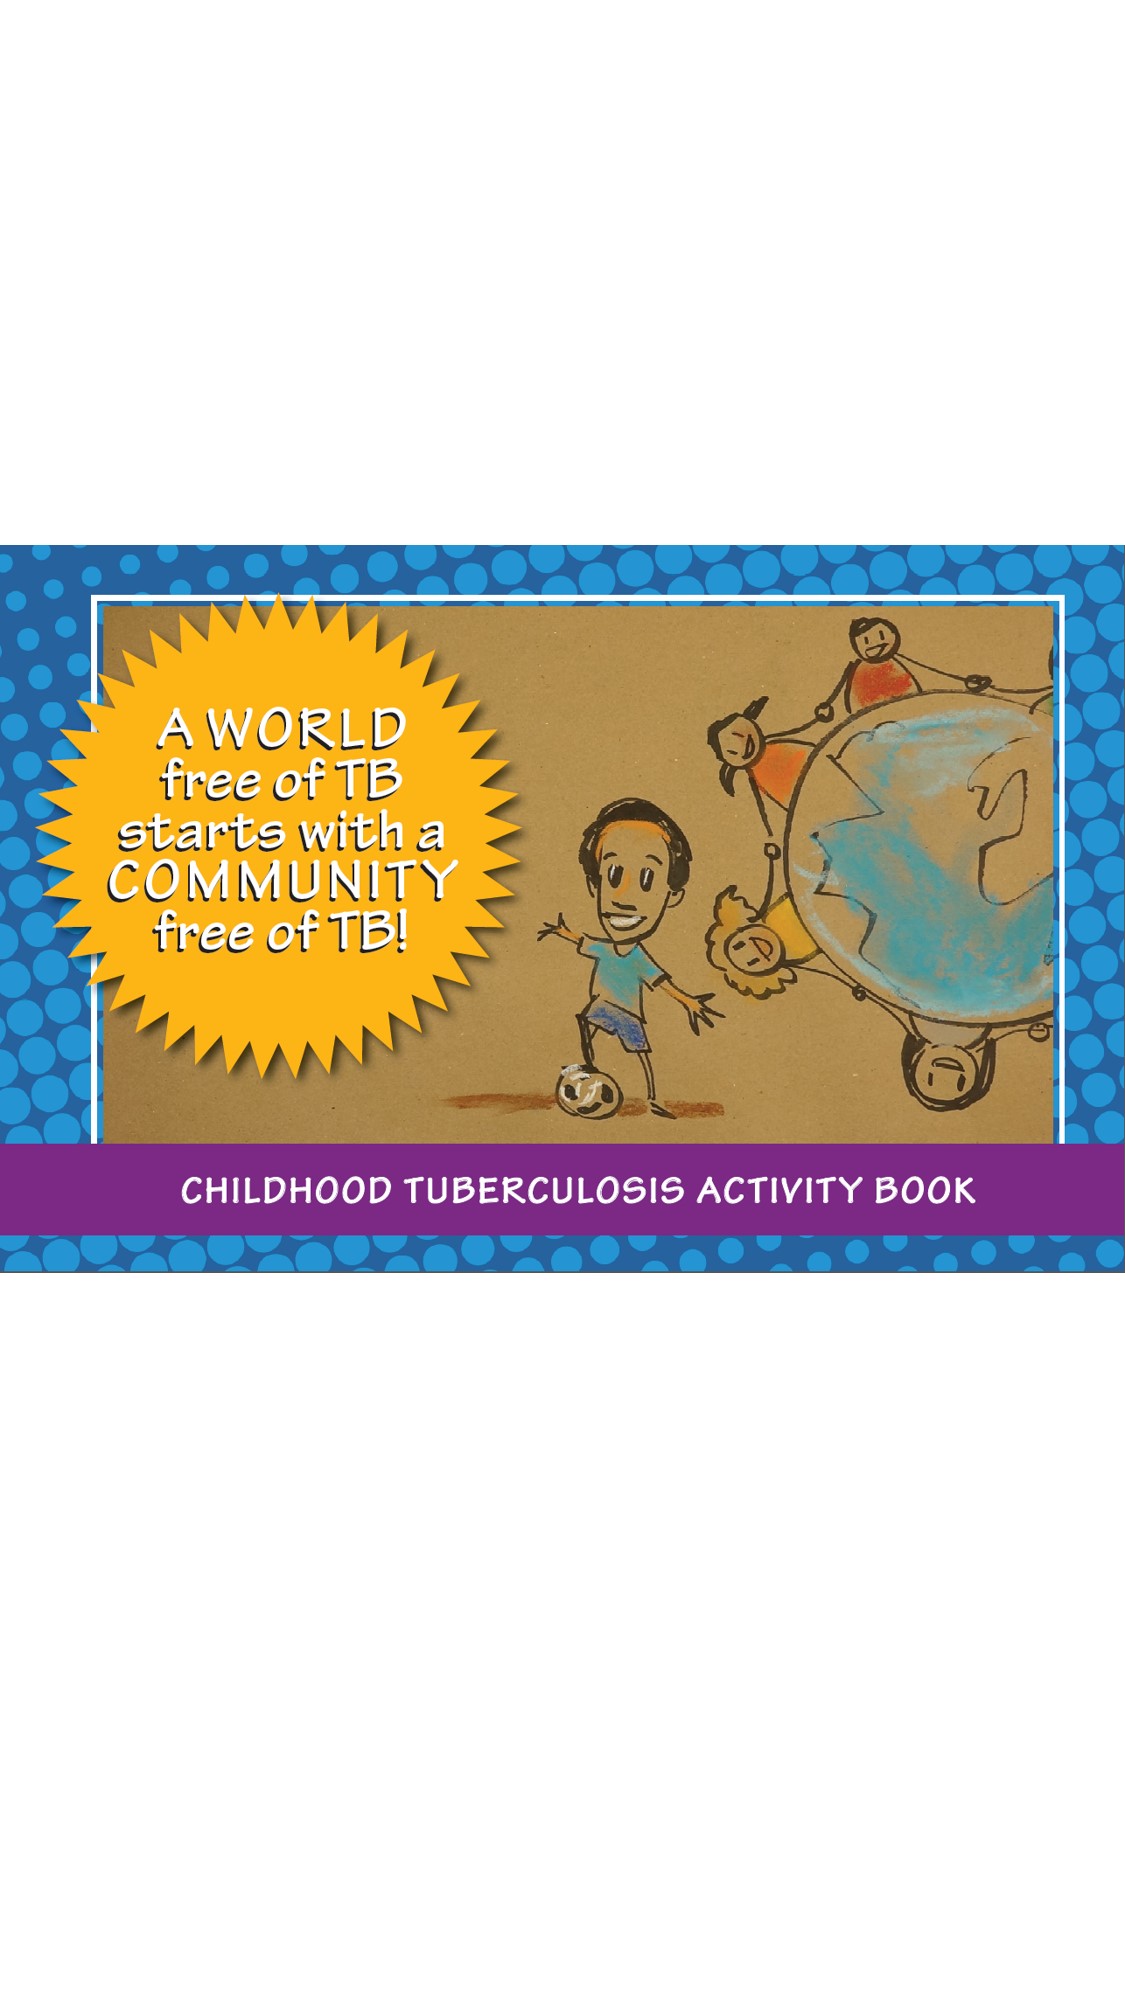 Childhood Tuberculosis Activity Book